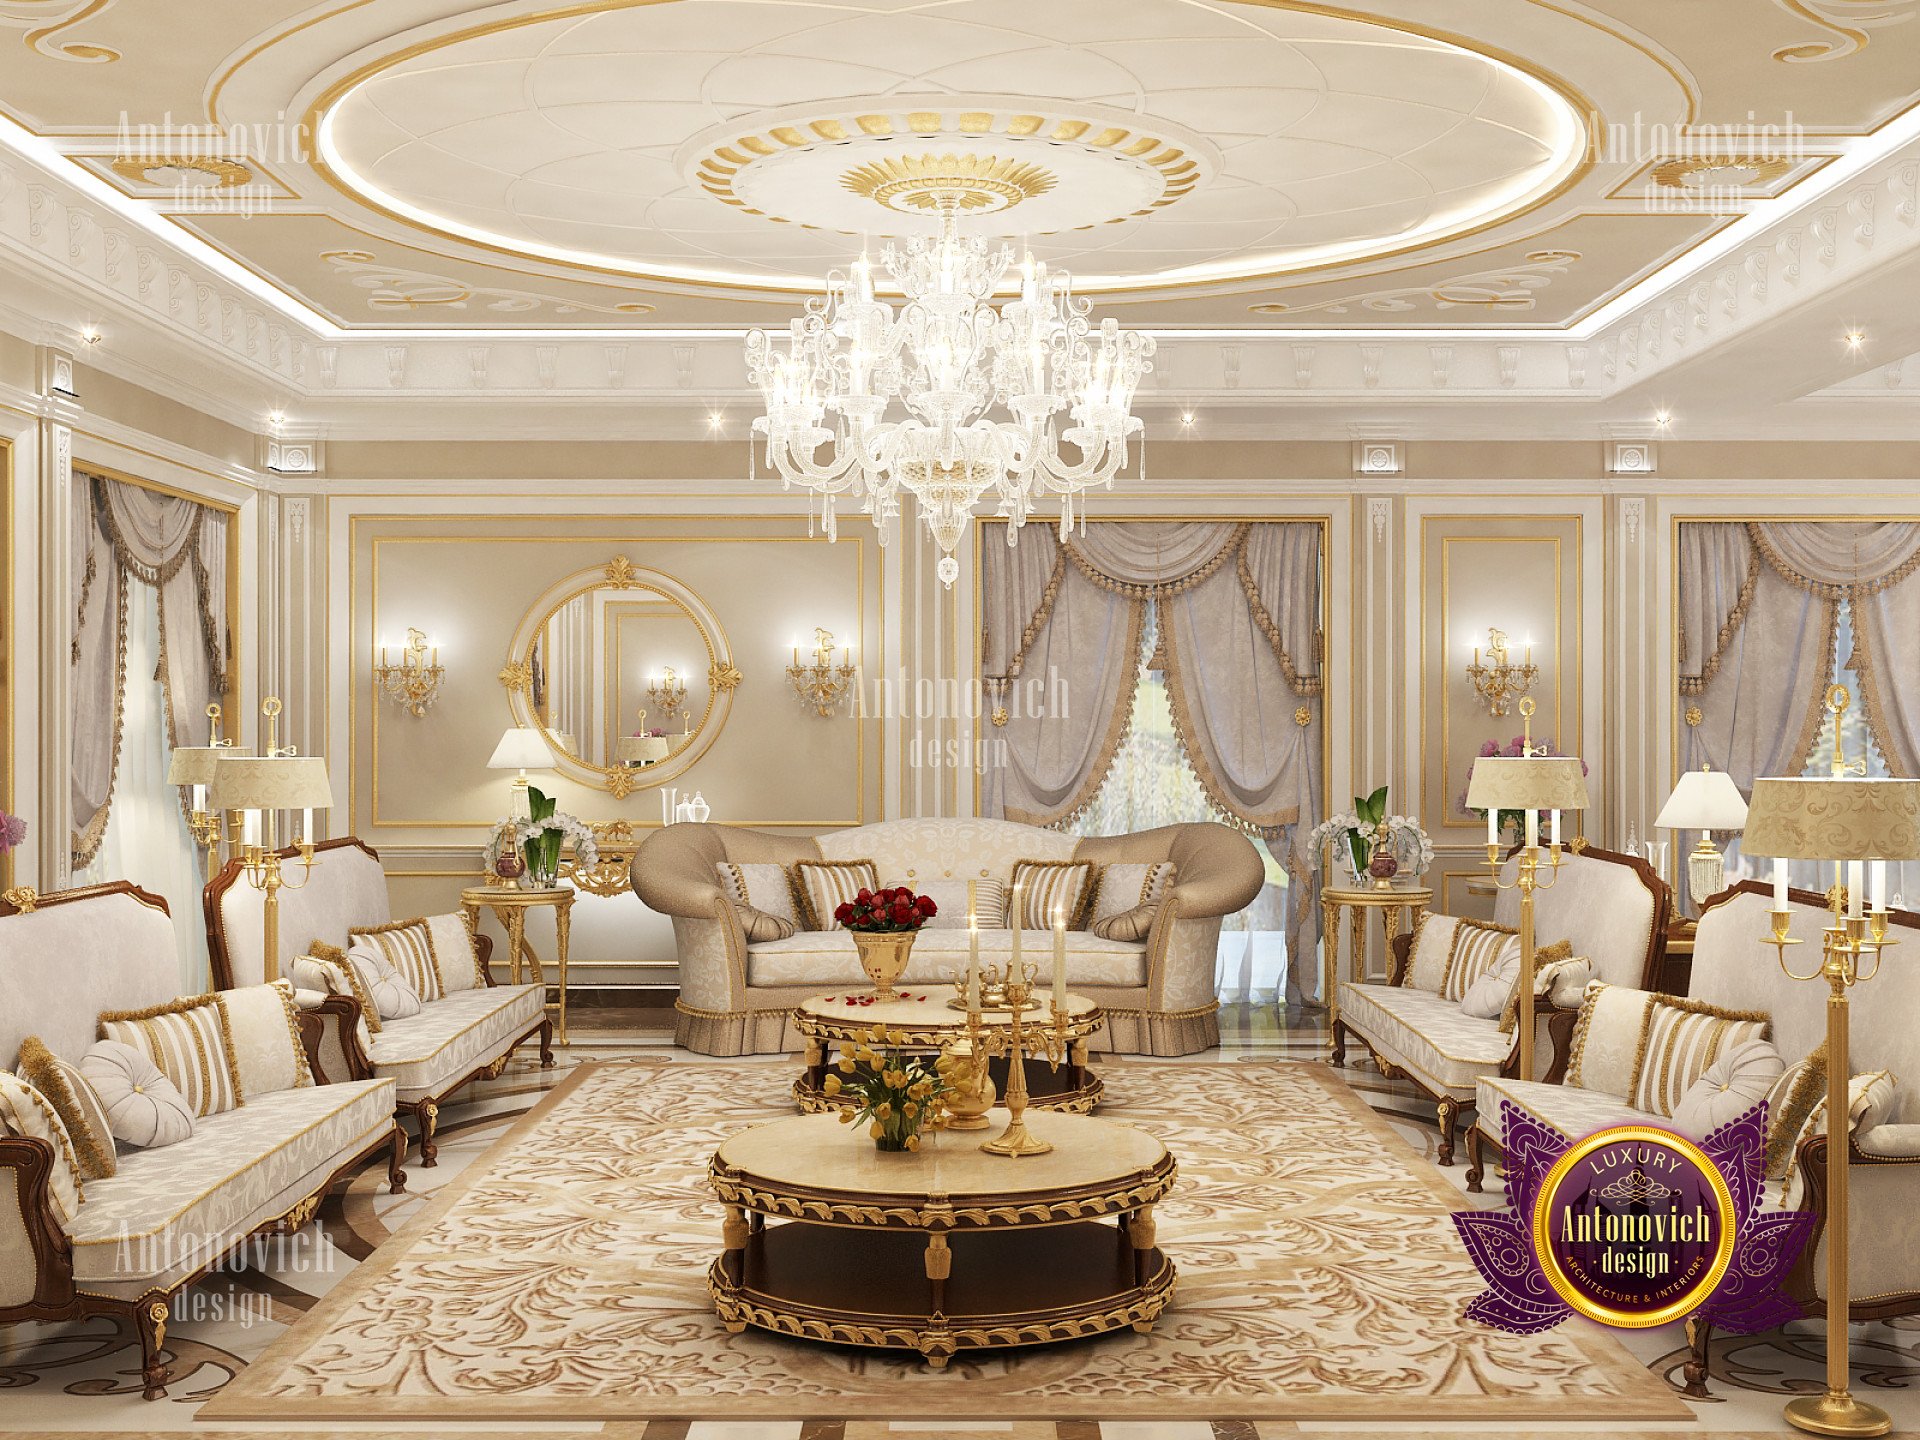 Luxury Interior Design: Beauty And Comfort In Every Detail